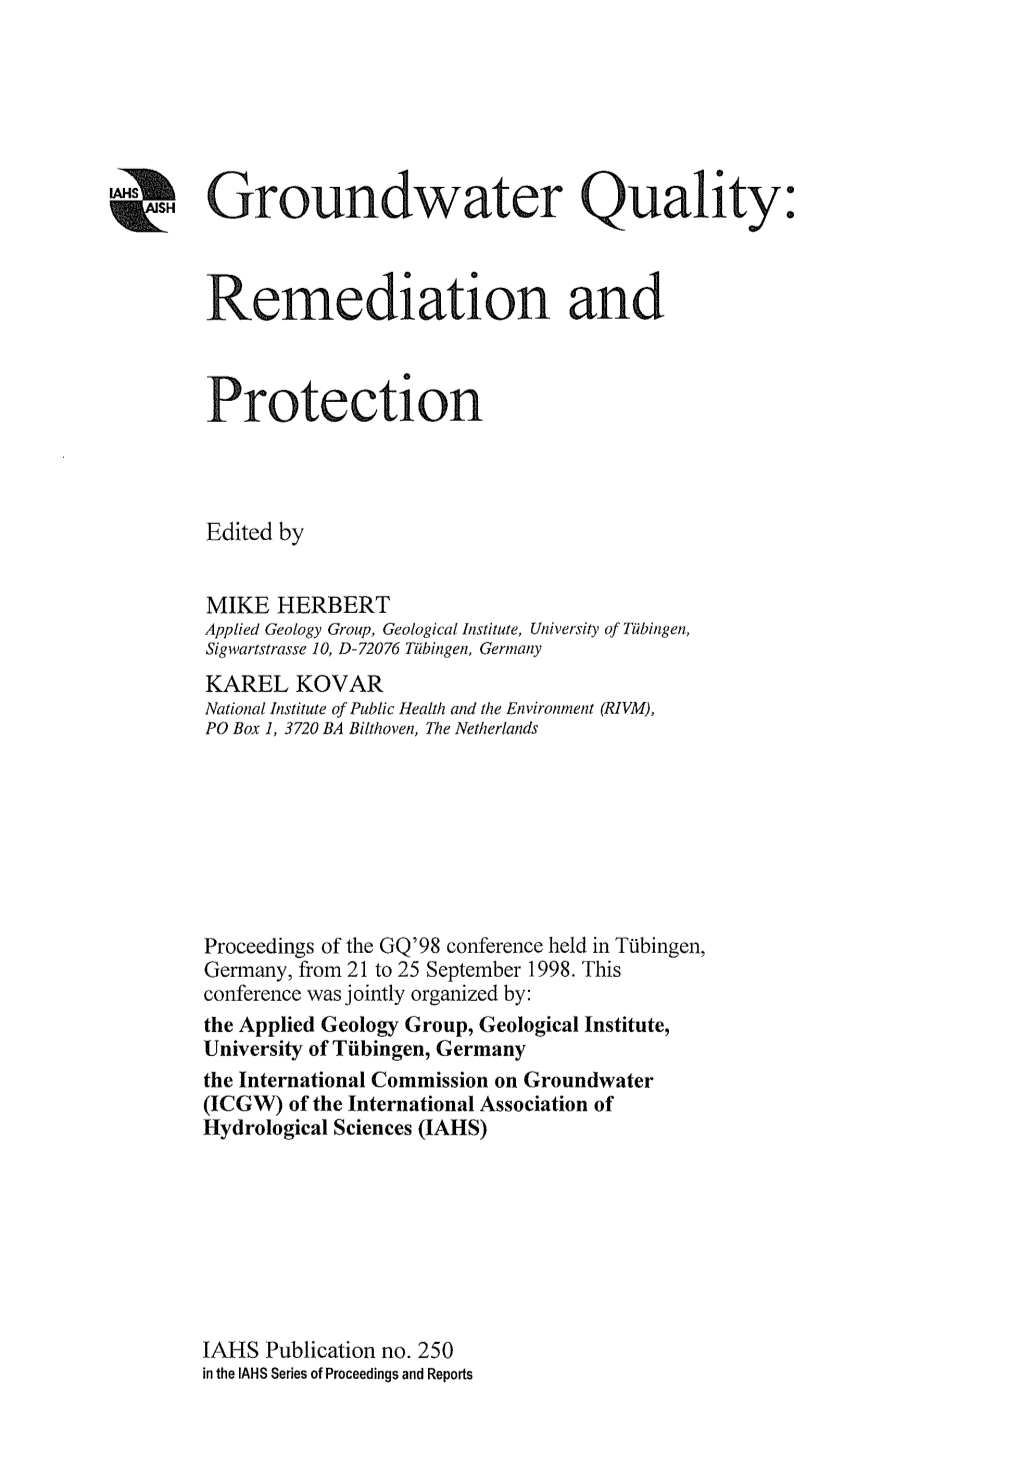 Groundwater Quality: Remediation and Protection